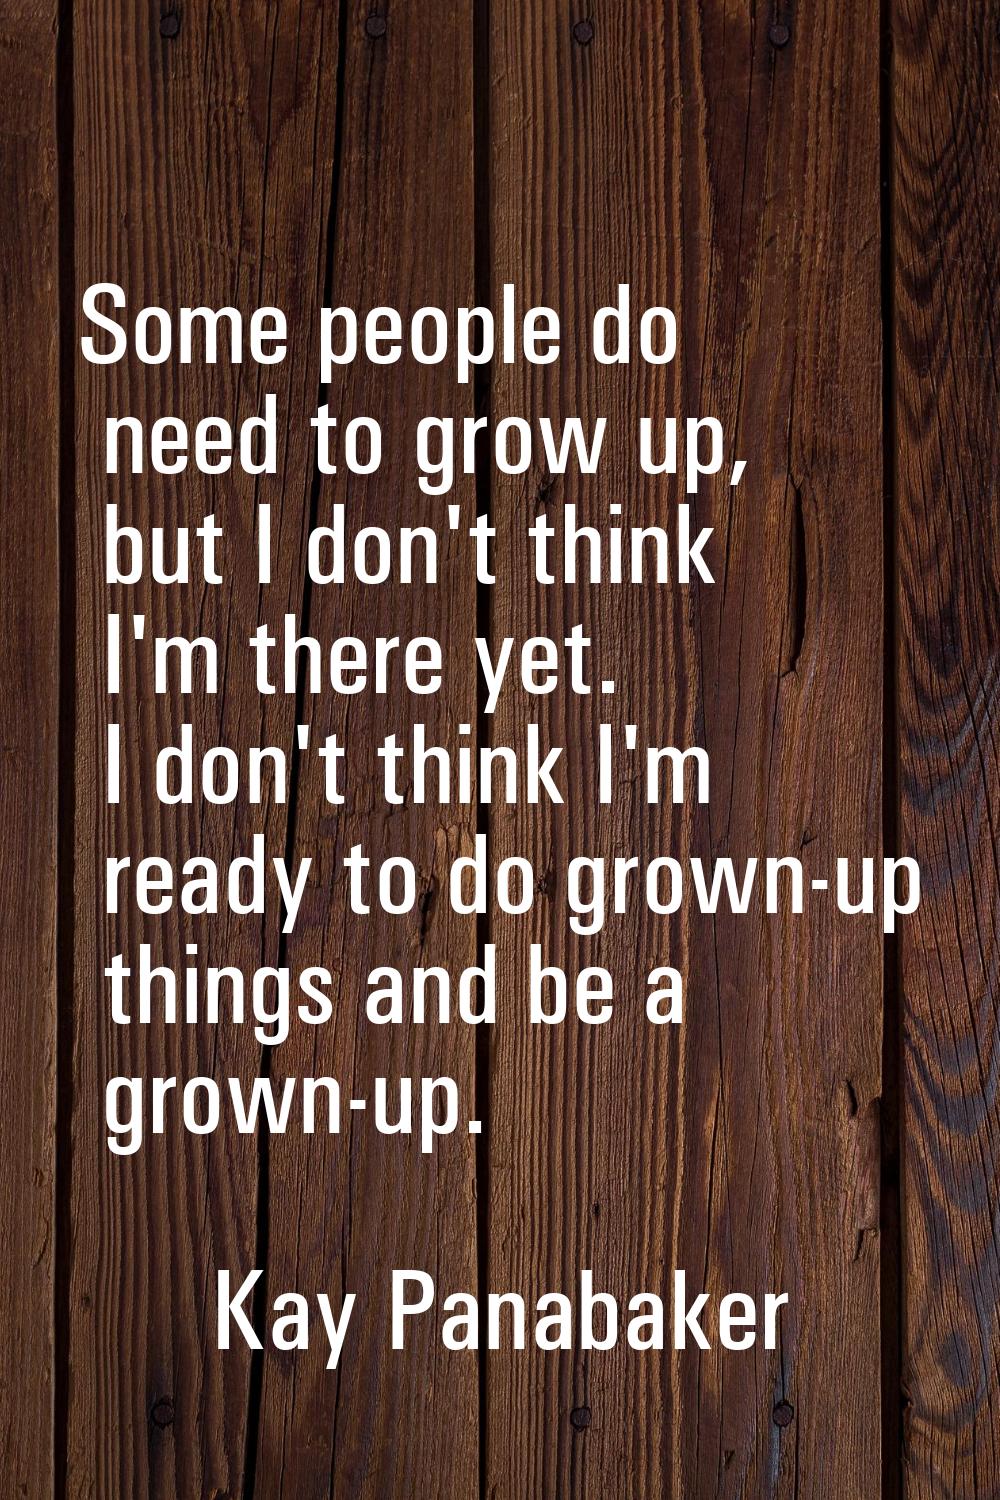 Some people do need to grow up, but I don't think I'm there yet. I don't think I'm ready to do grow